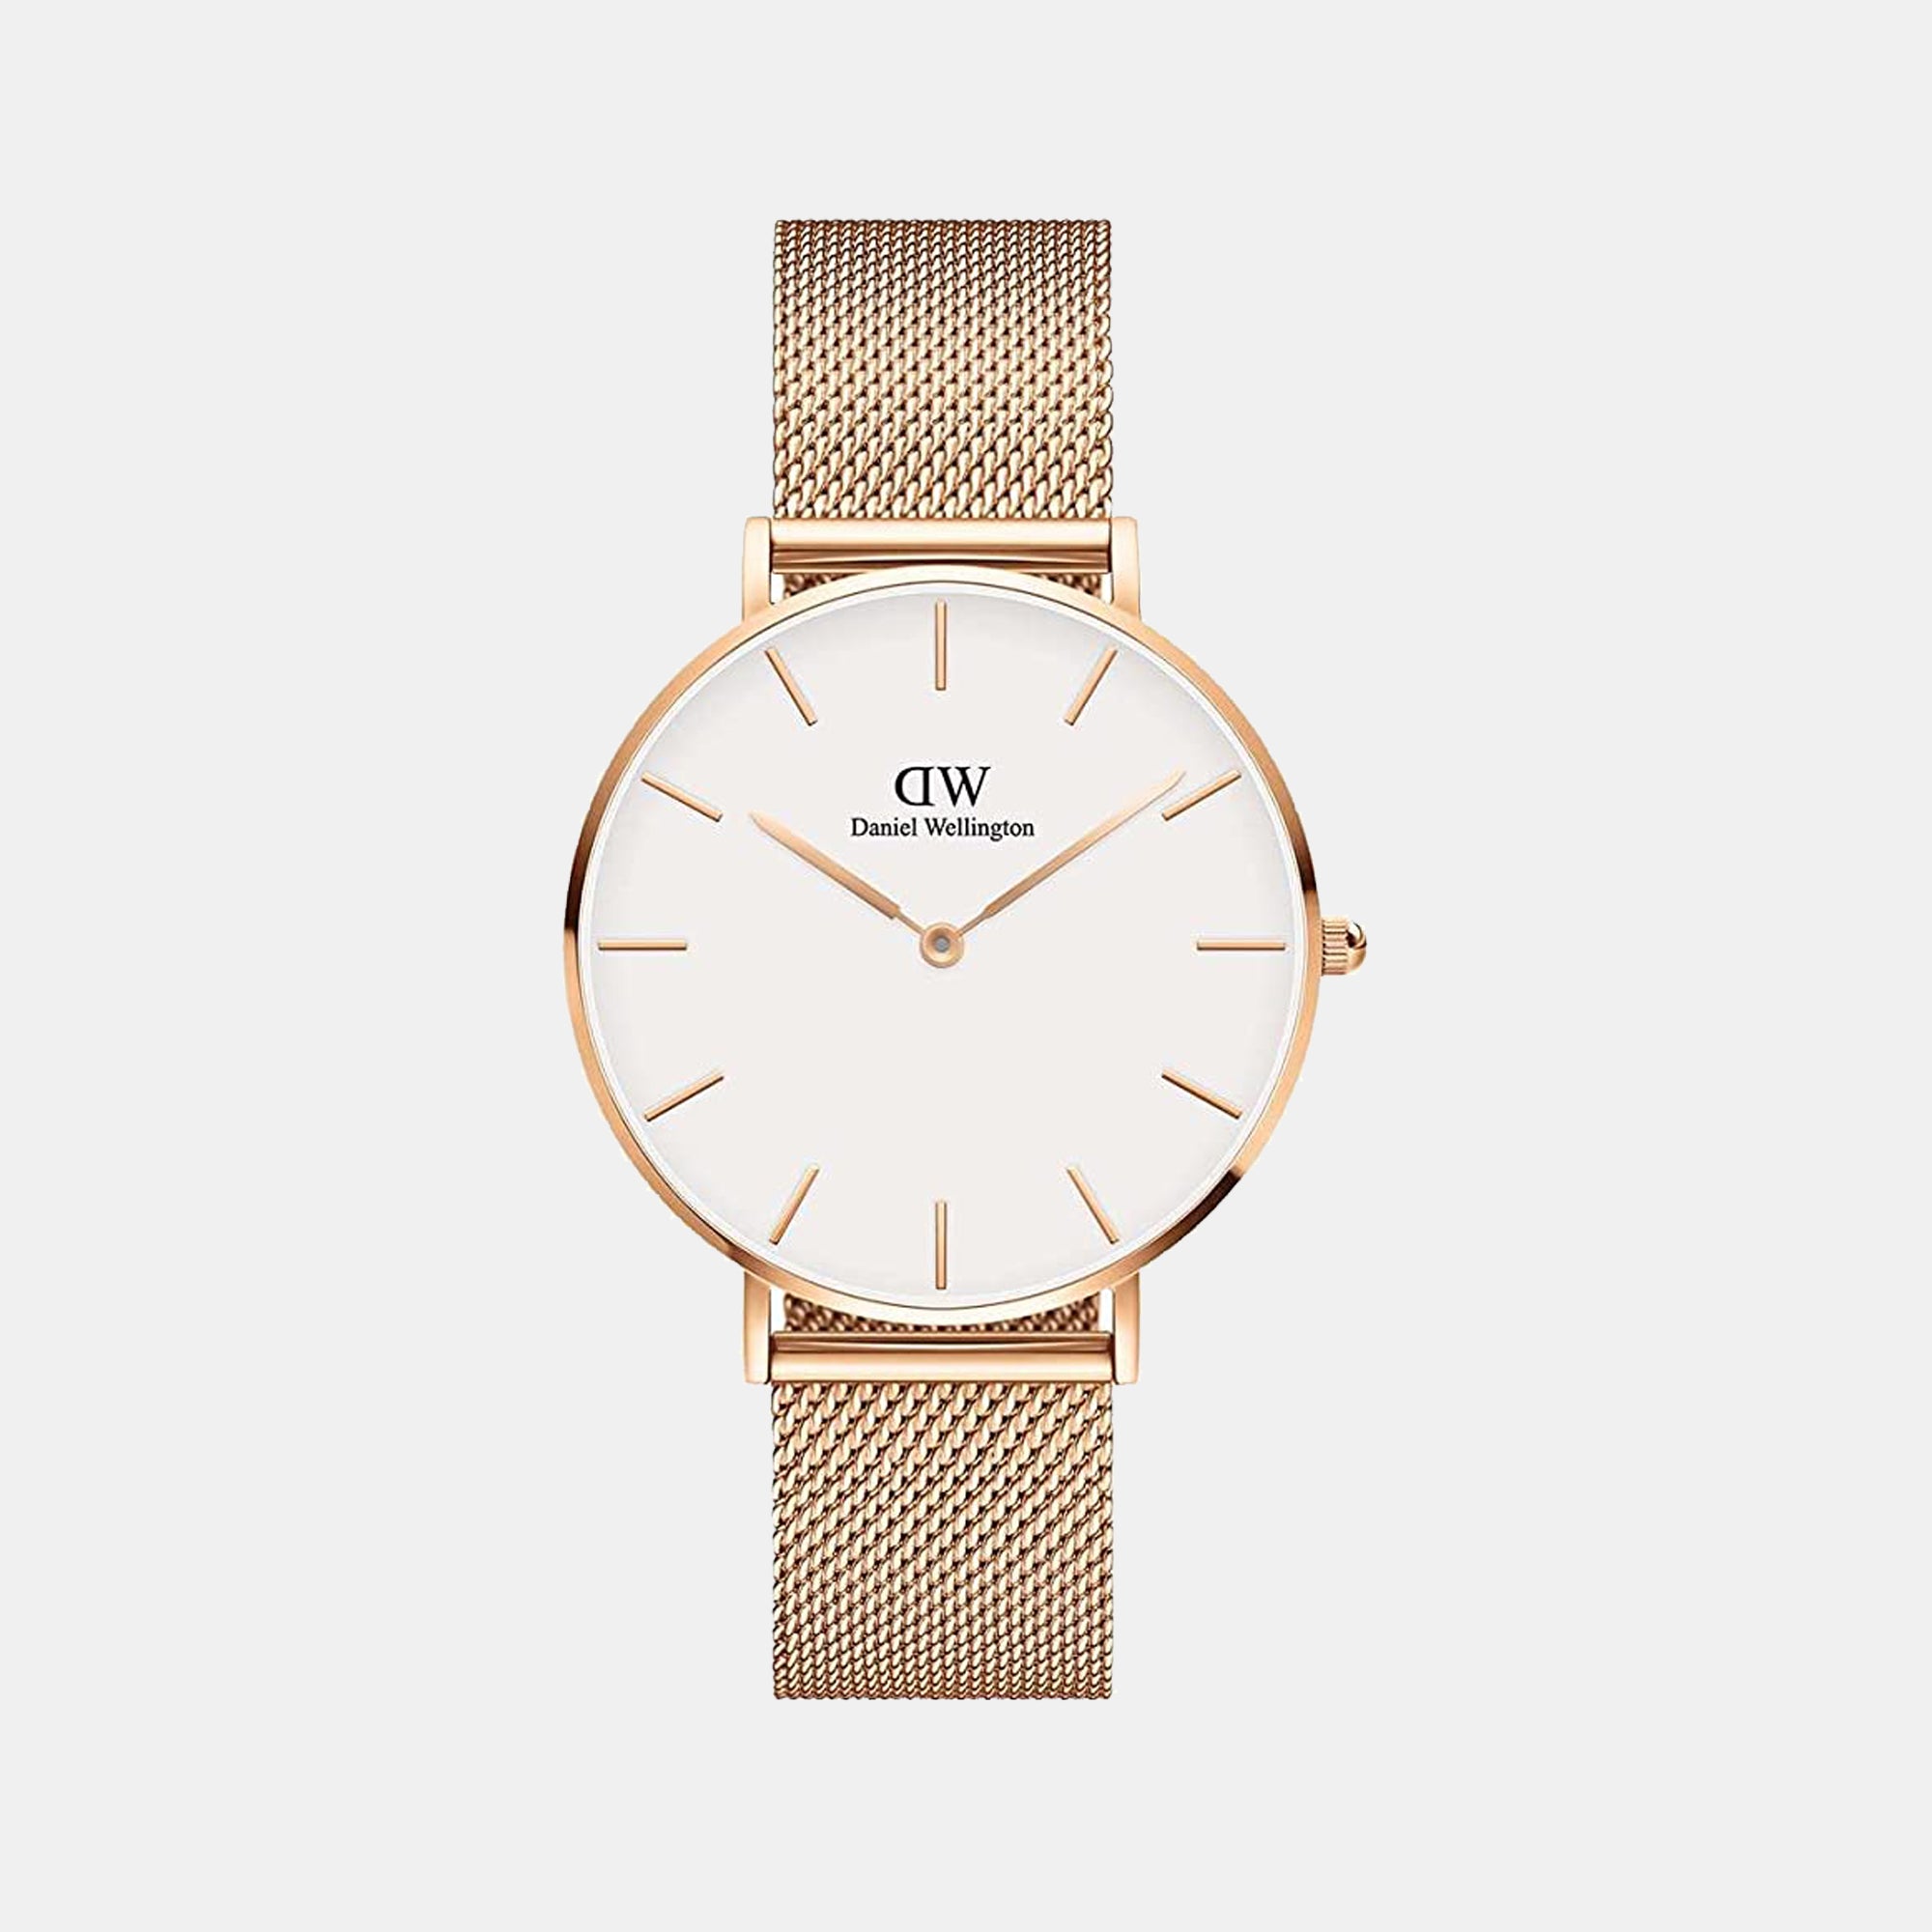 Petite 5-Link - Women's gold watch with white dial| DW